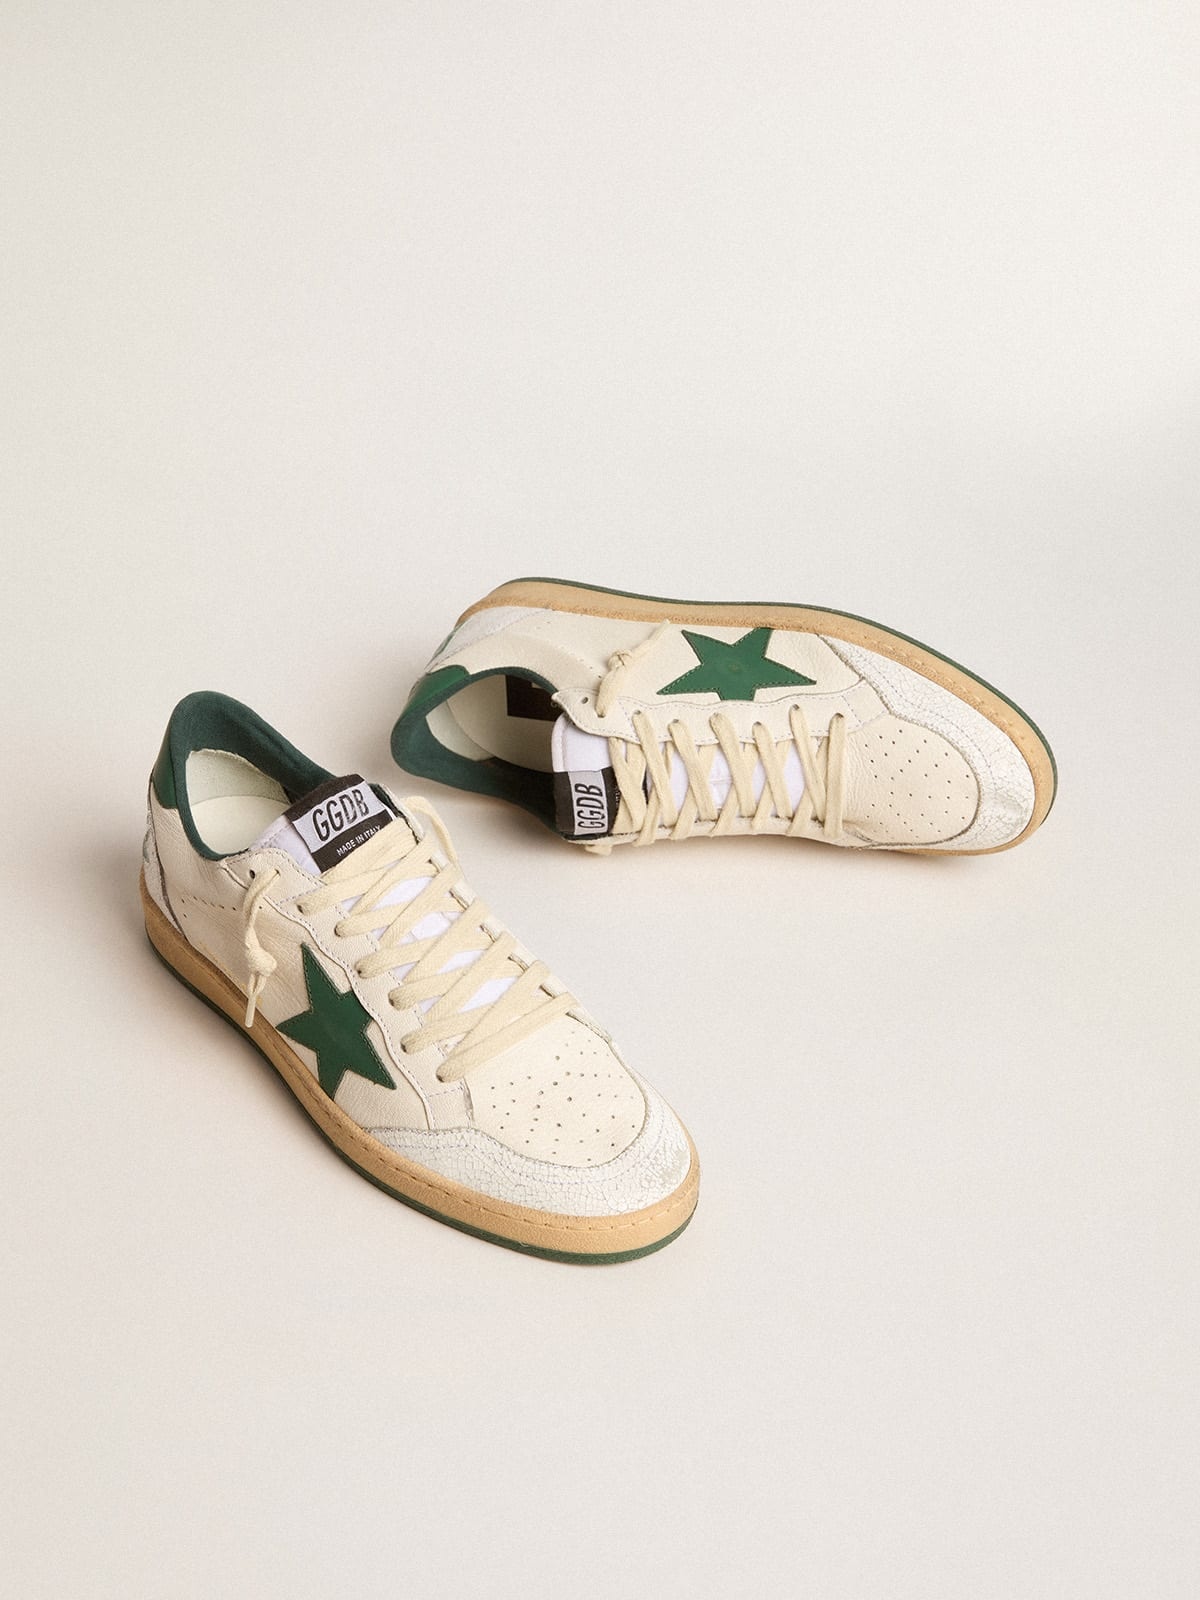 Women's Ball Star Wishes in white nappa leather with green leather star and heel tab - 3